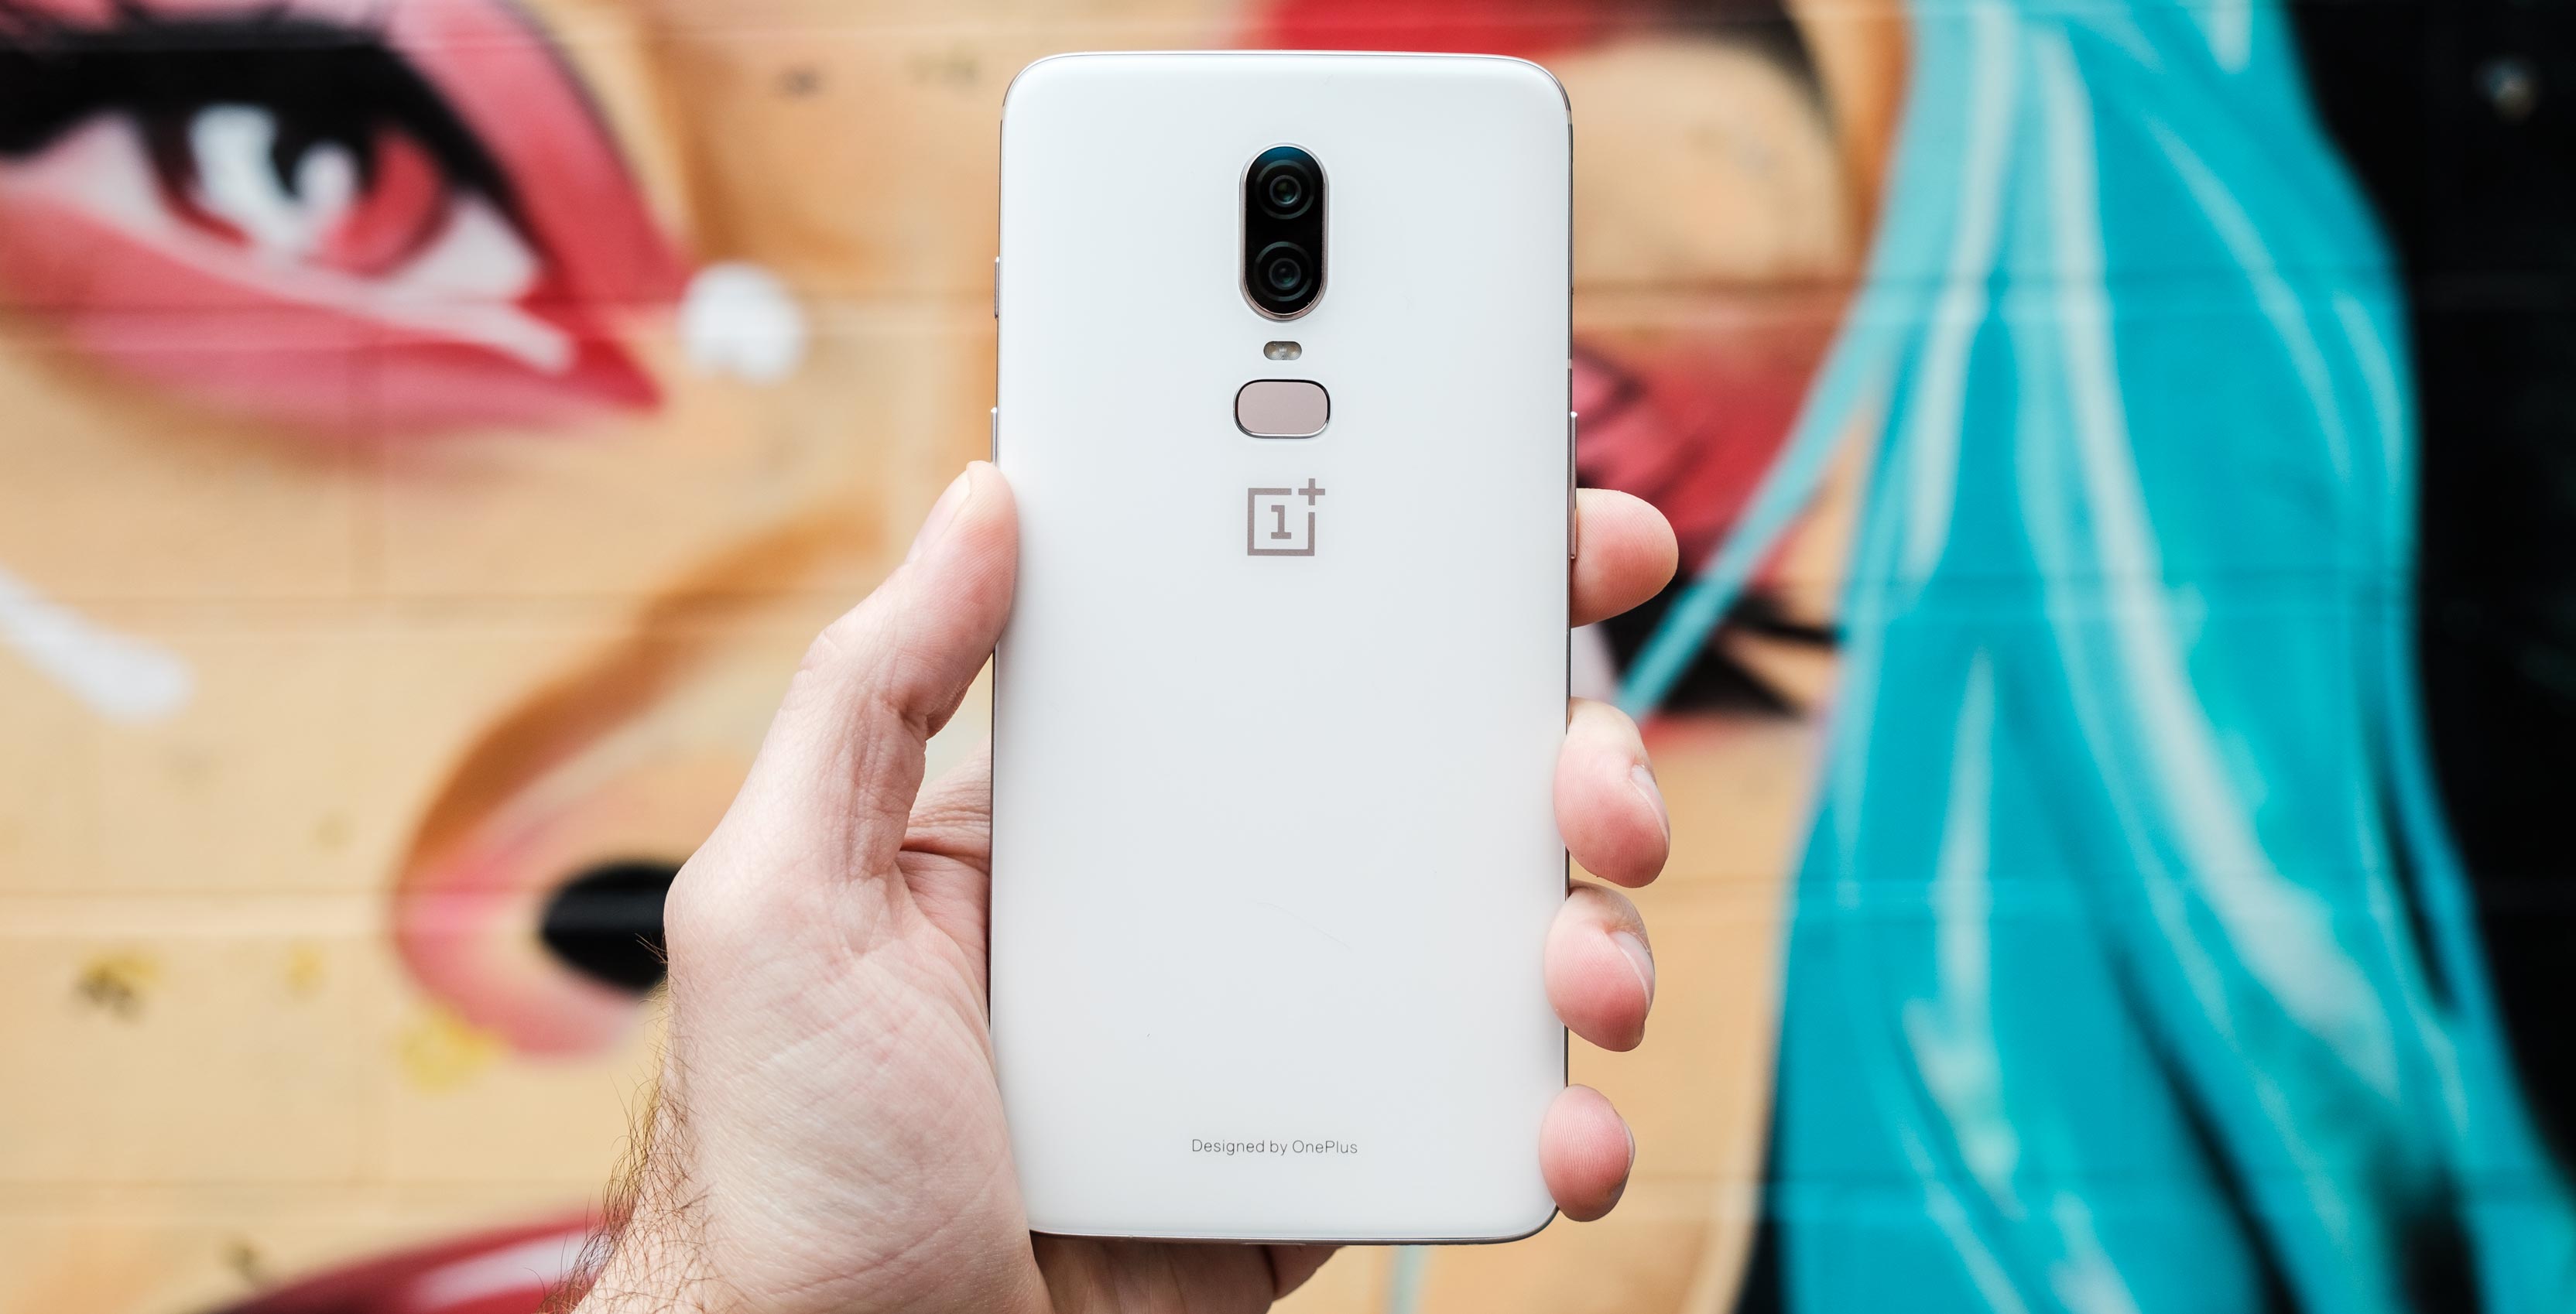 The OnePlus 6 is 'Silk White'